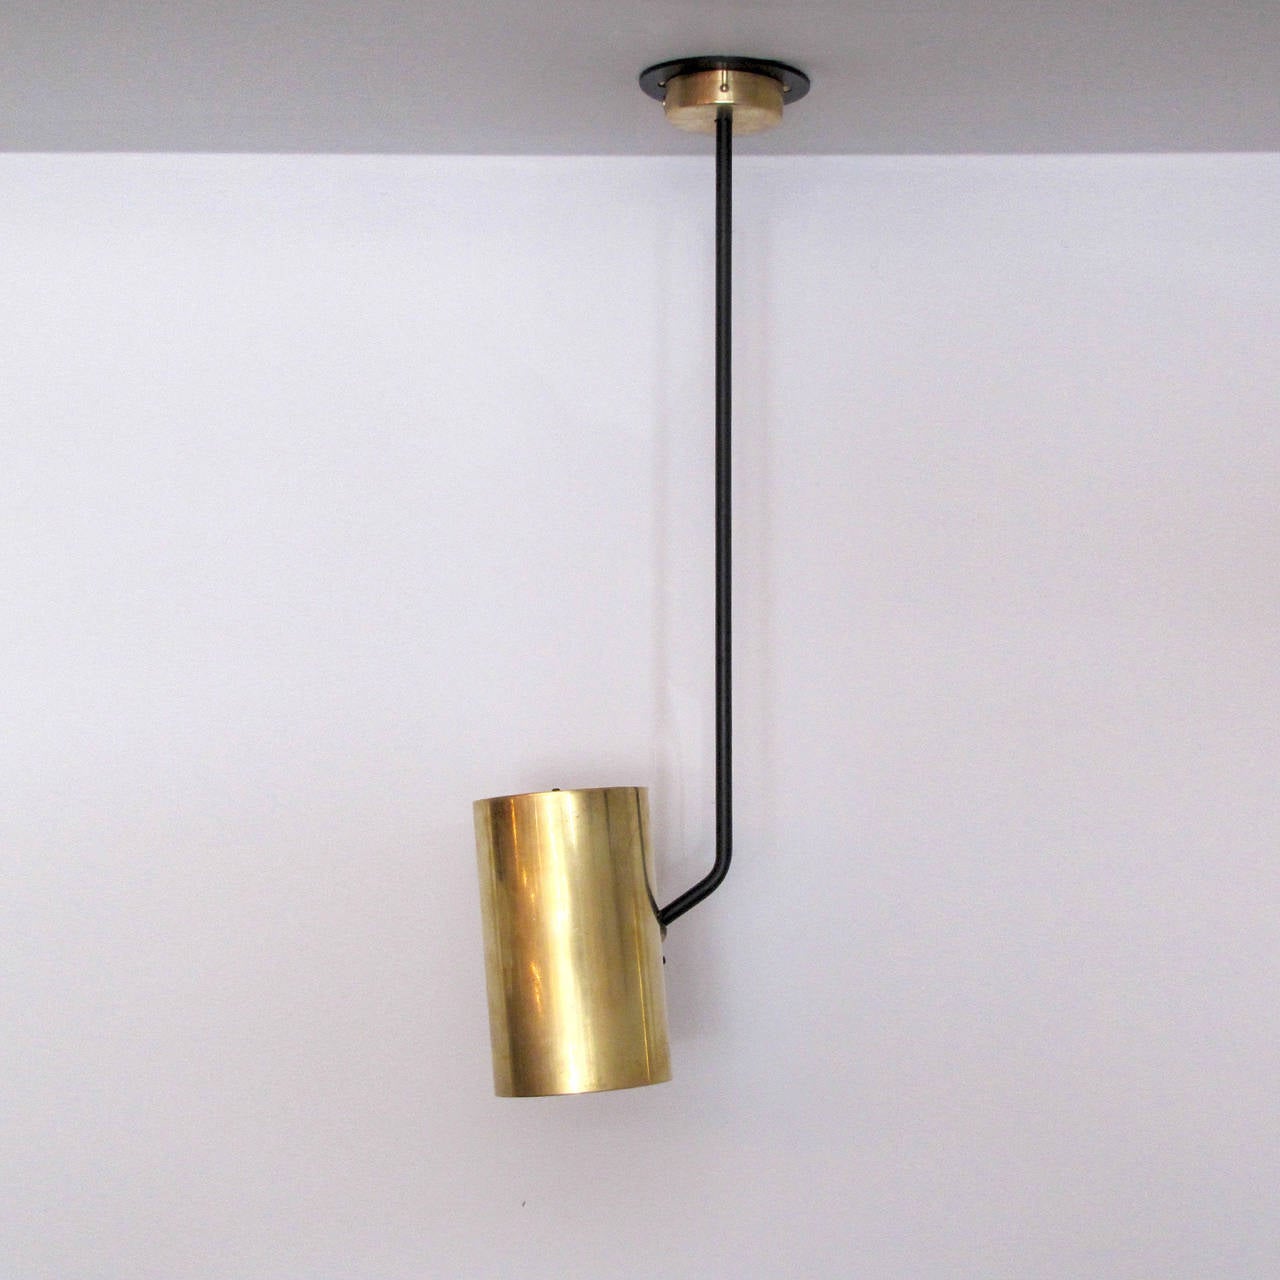 Great pair of understated French ceiling lights by Parscot, long stem pendants with adjustable brass cylinders, can be used as wall lights, priced as a pair.